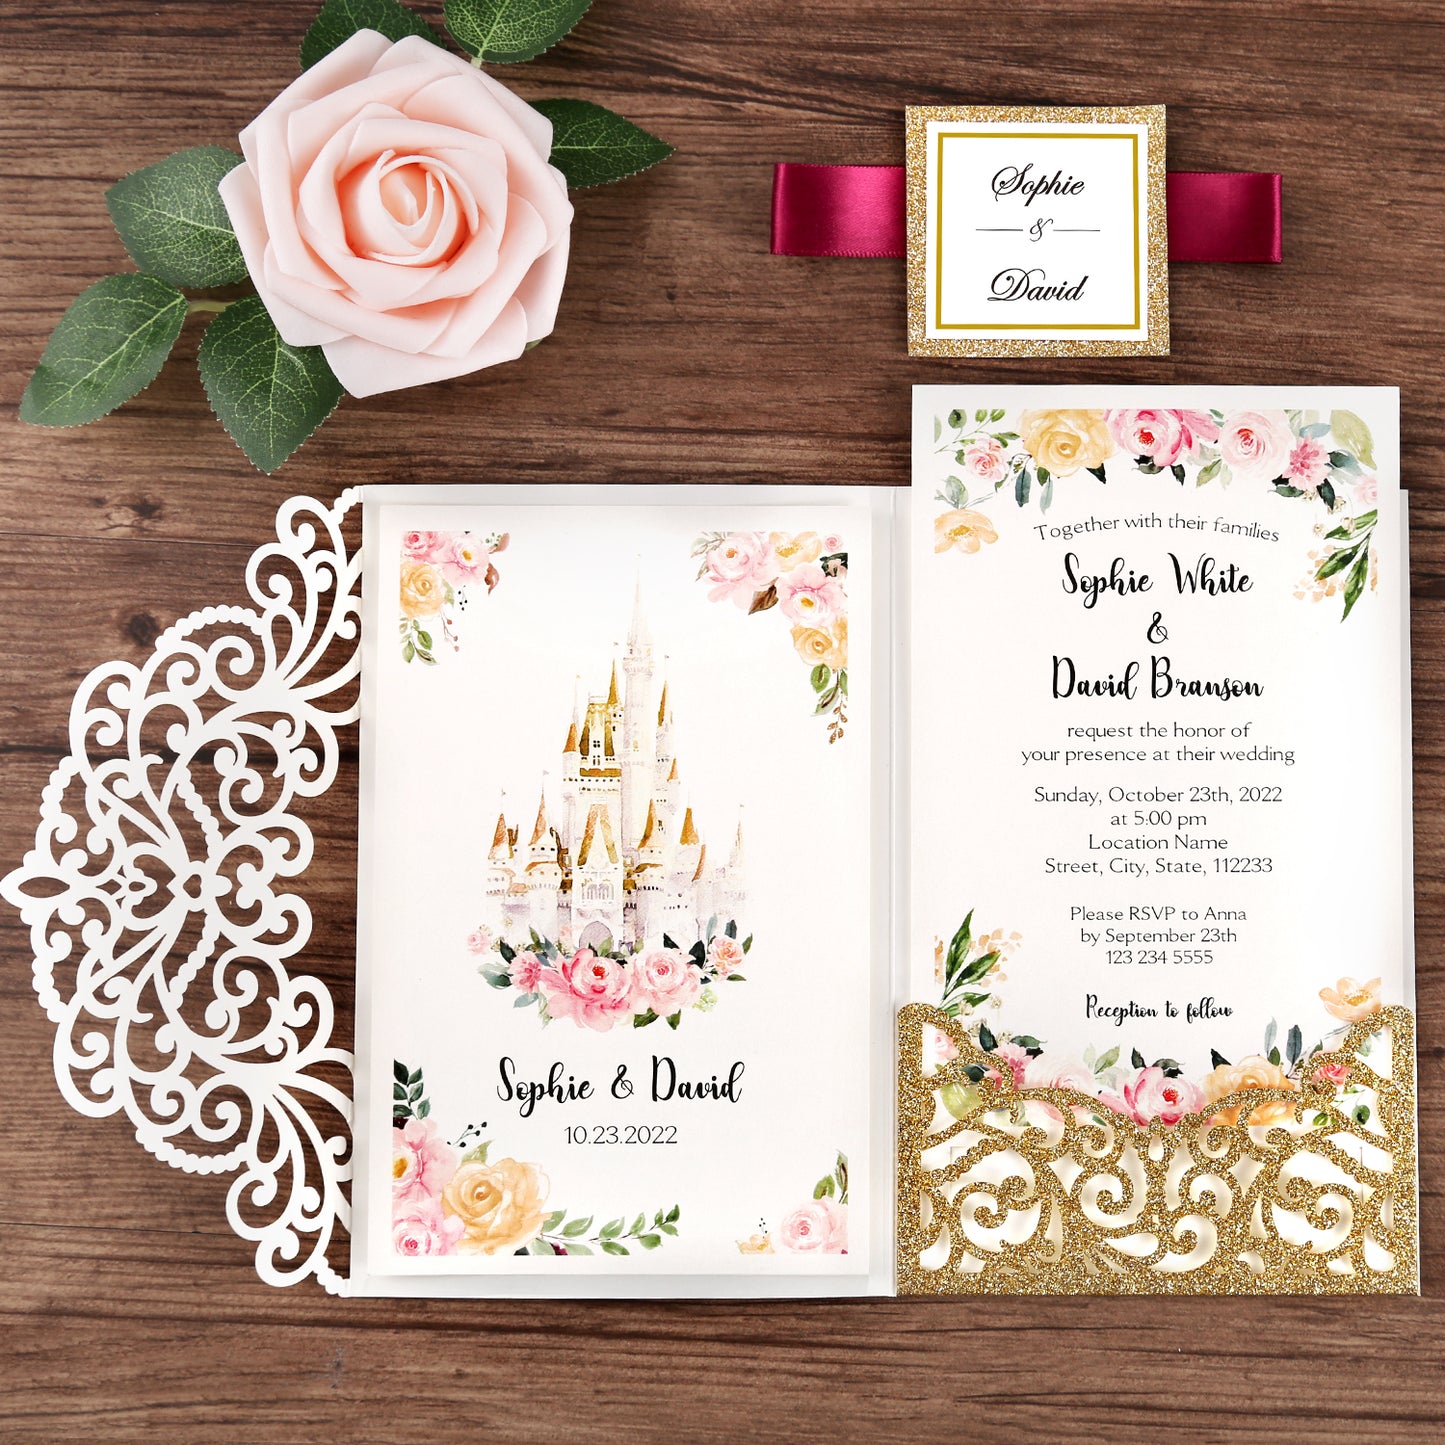 4.7 x7 inch Gold Glitter Laser Cut Wedding Invitations With Envelopes Kit Hollow Rose Pocket And Burgundy Ribbon Belly Band for Wedding Bridal Shower Engagement Invite